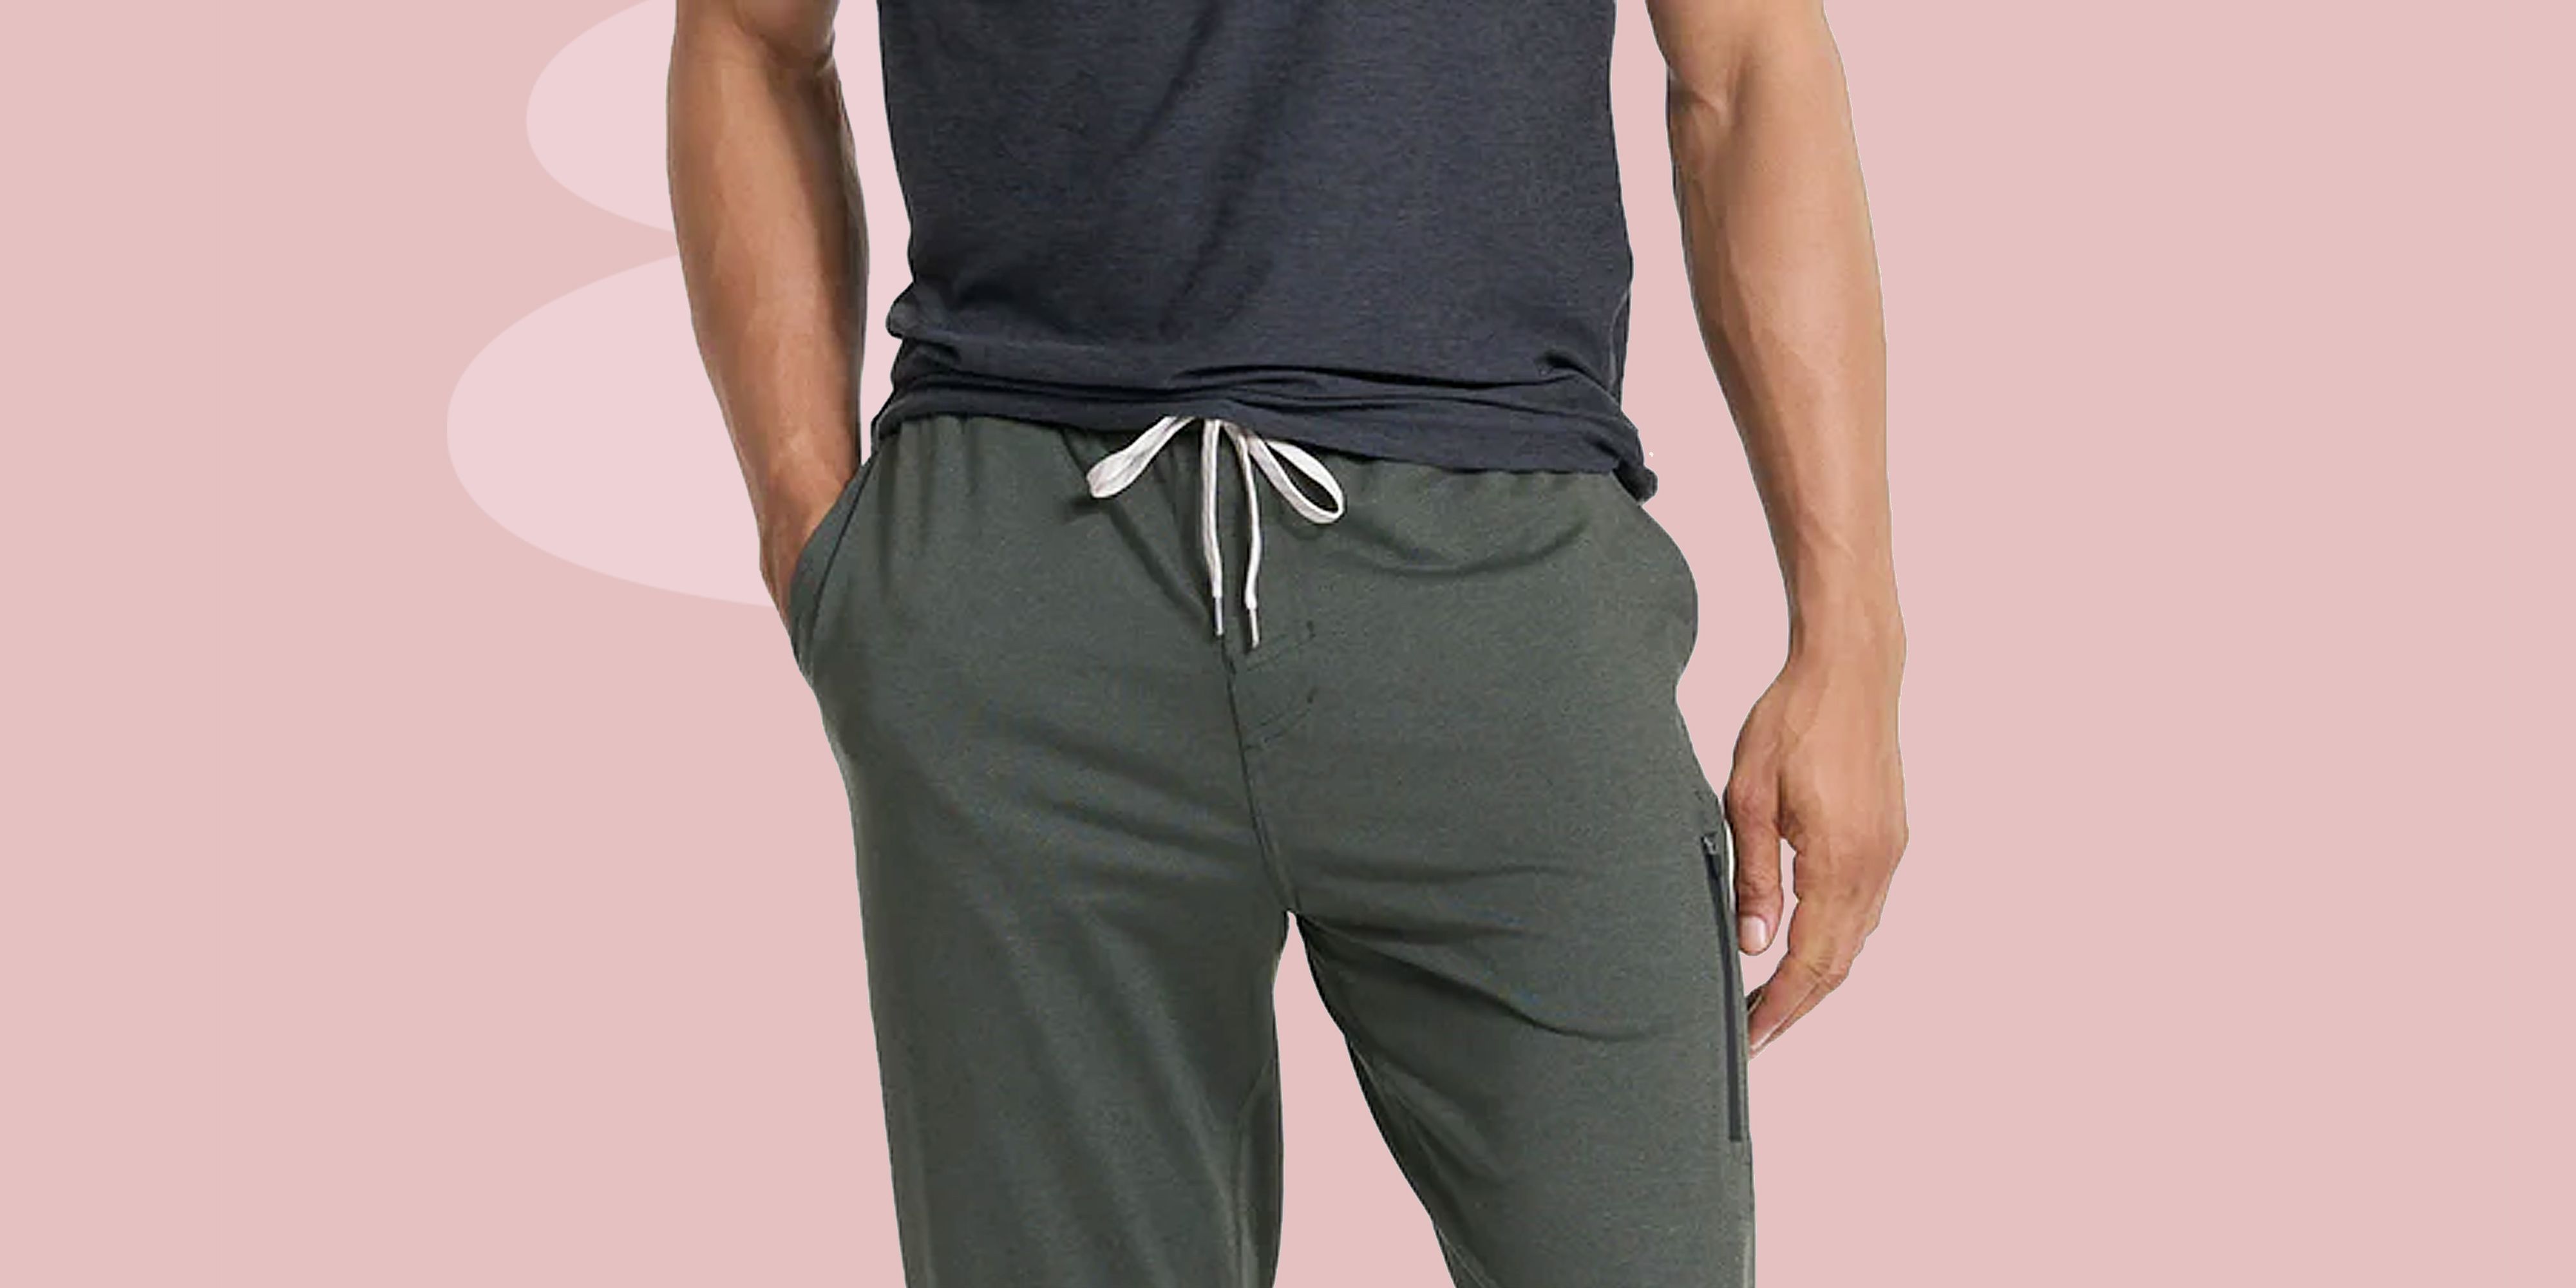 The 15 Best Workout Pants to Get You Moving